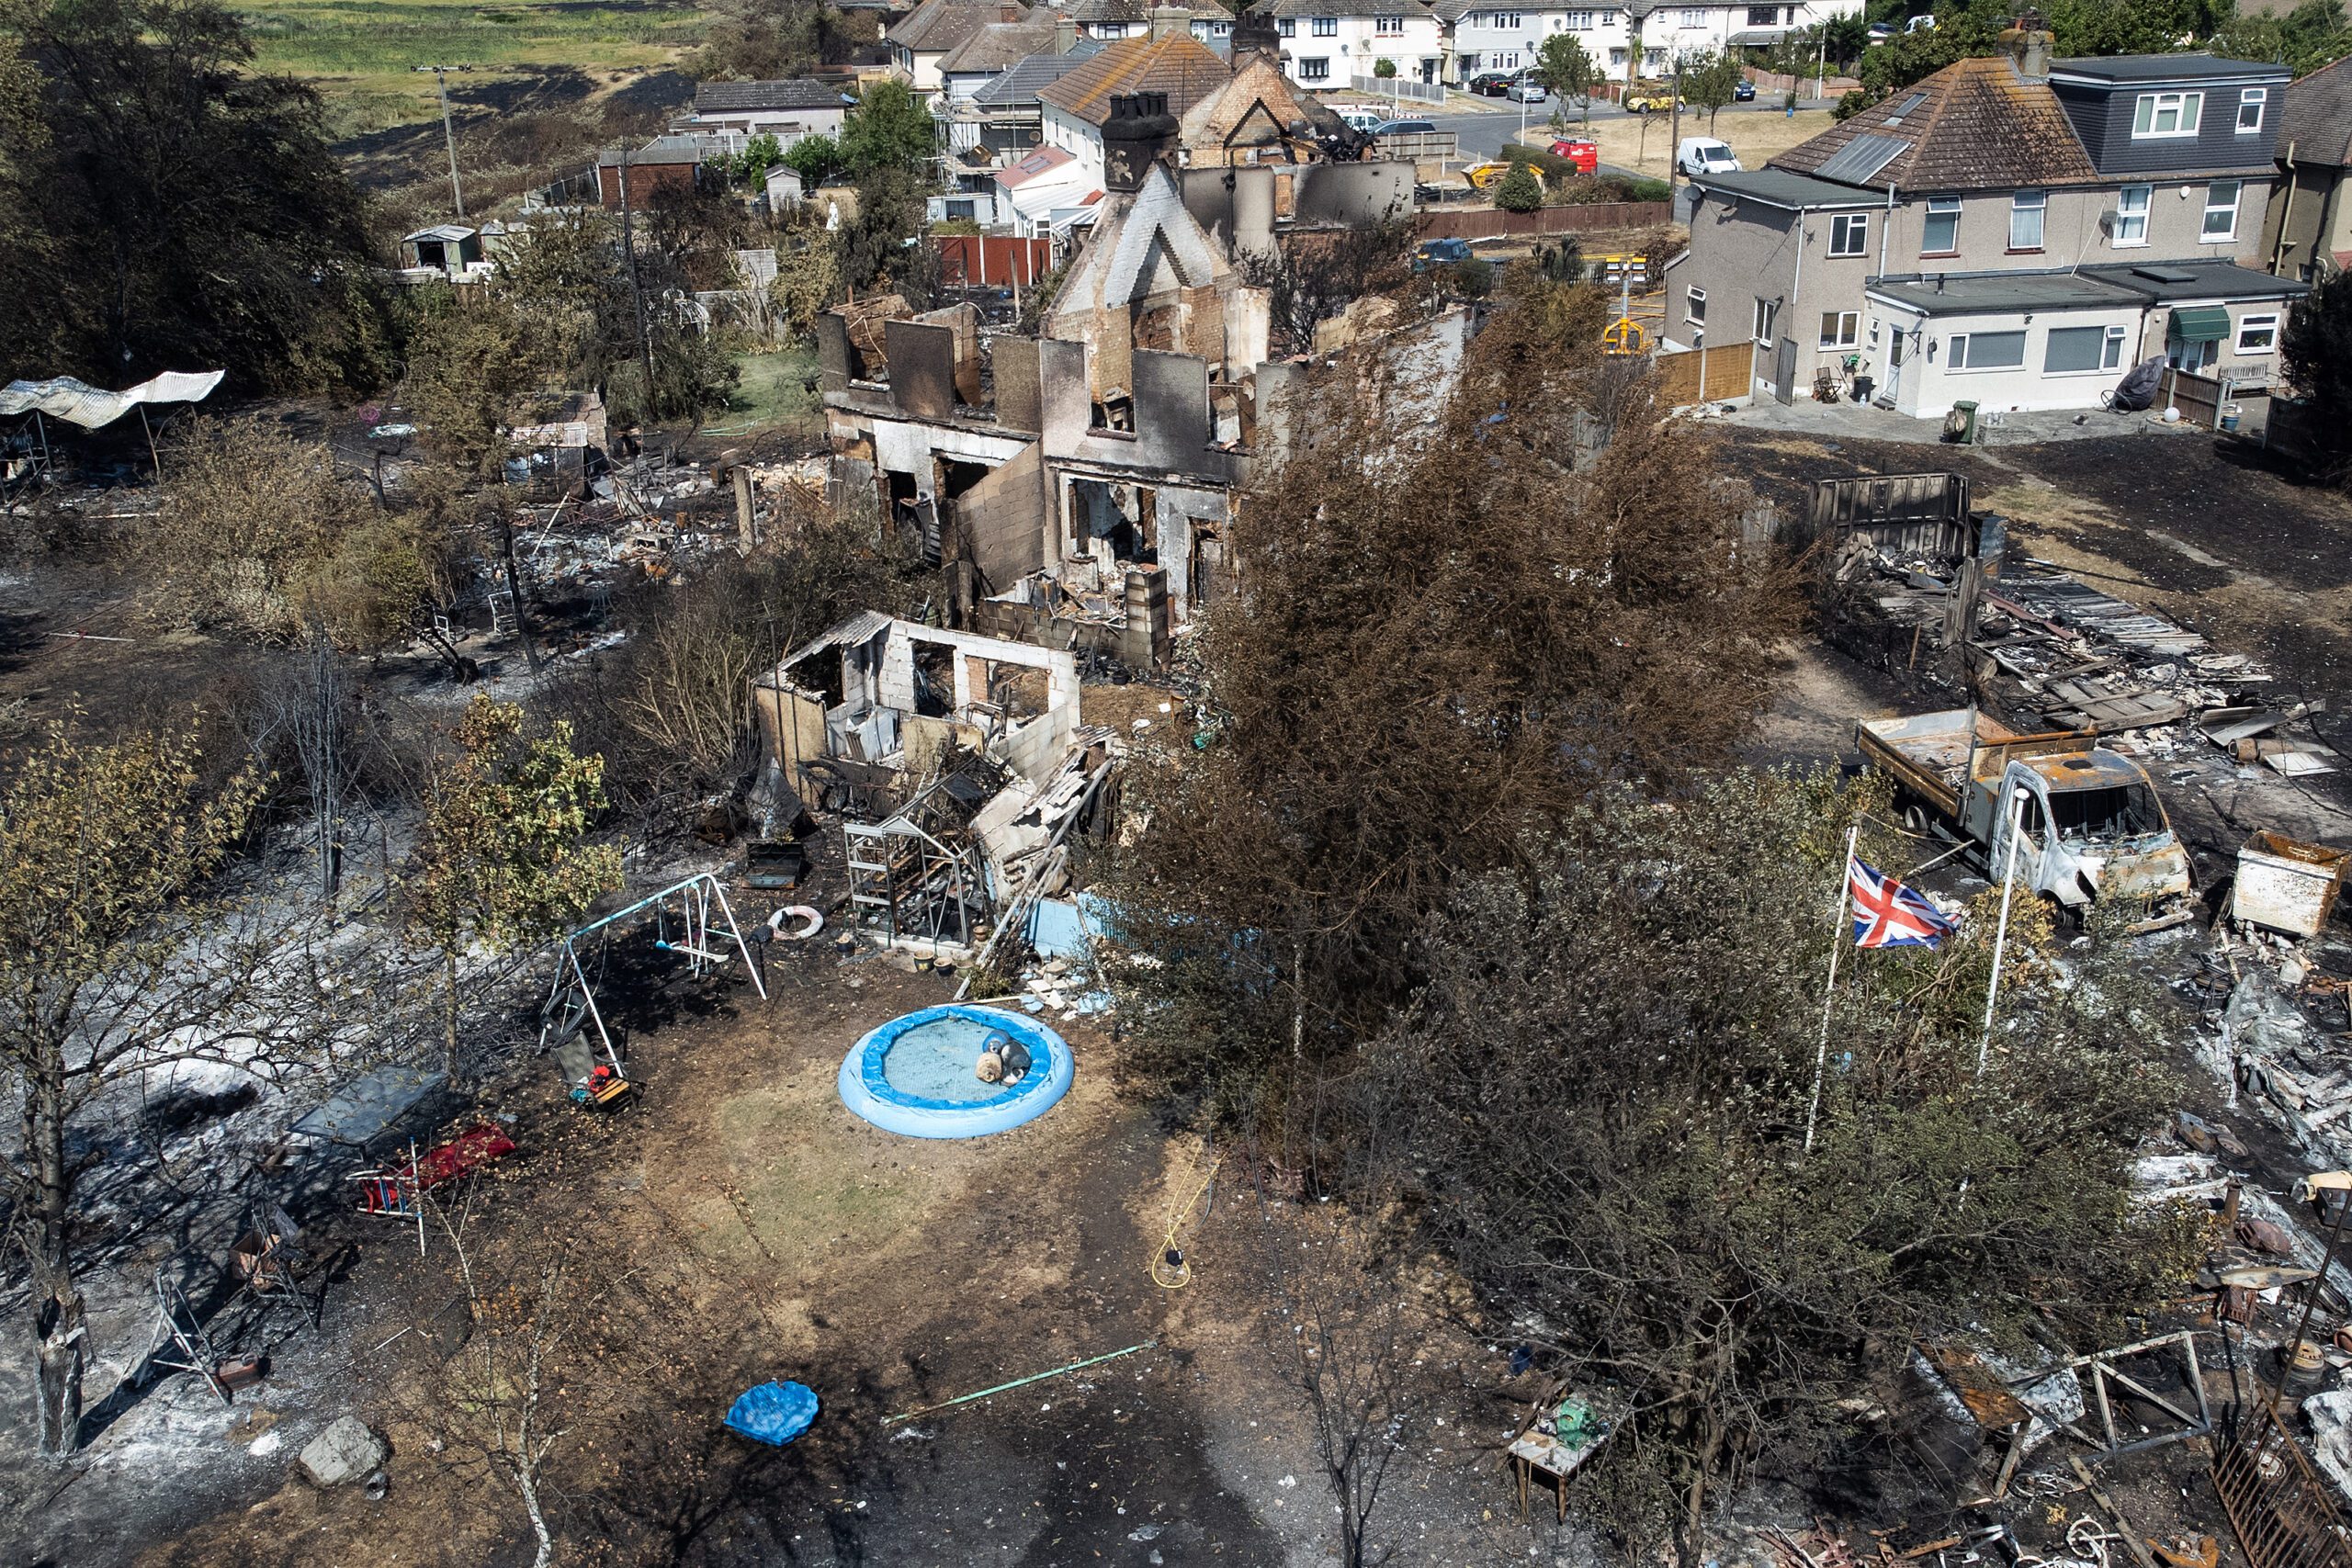 Burnt, skeleton houses destroyed by wildfire. The central house is fallen in and surrounded by dark, ashy ground.